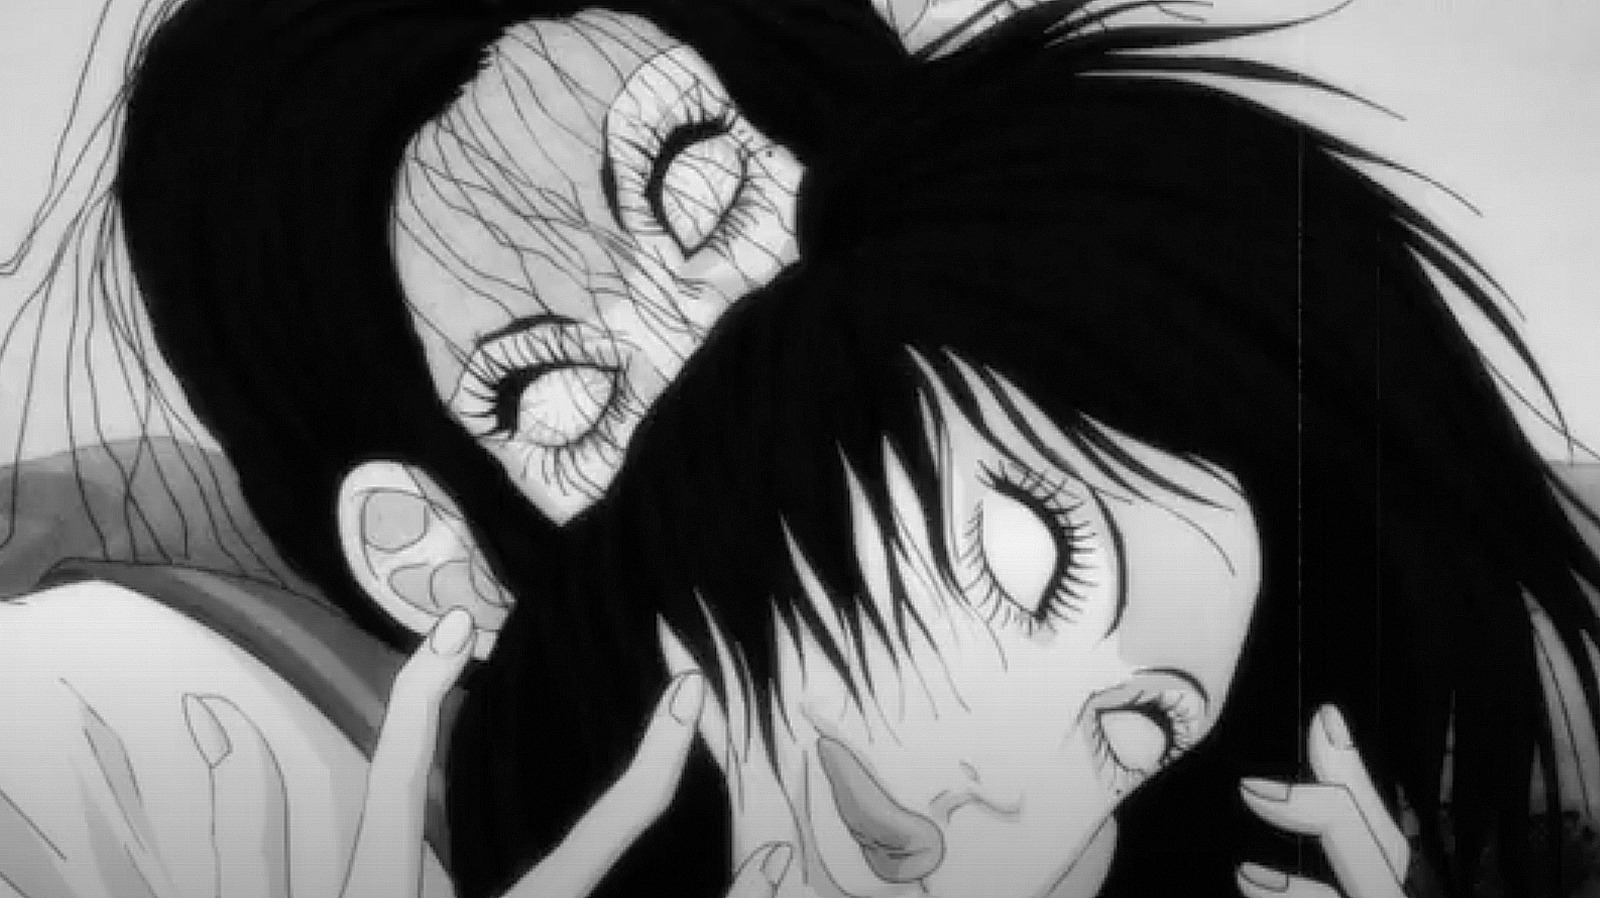 New Visual, Stills, and Info for Junji Ito Maniac Anime Released